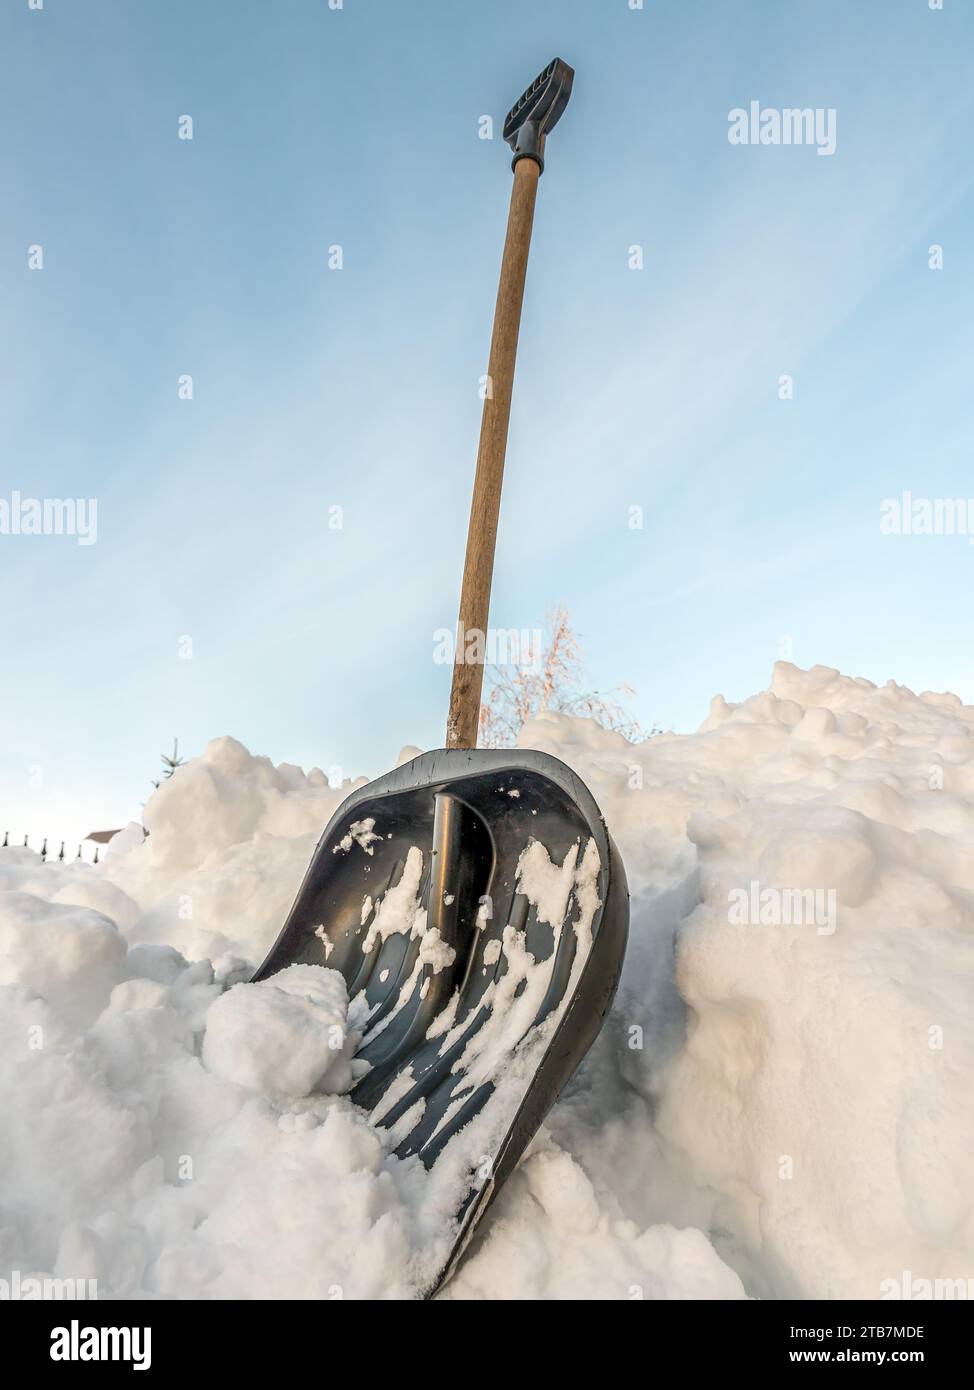 Shot of snow clearing shovel driven into thick snow cover Stock Photo